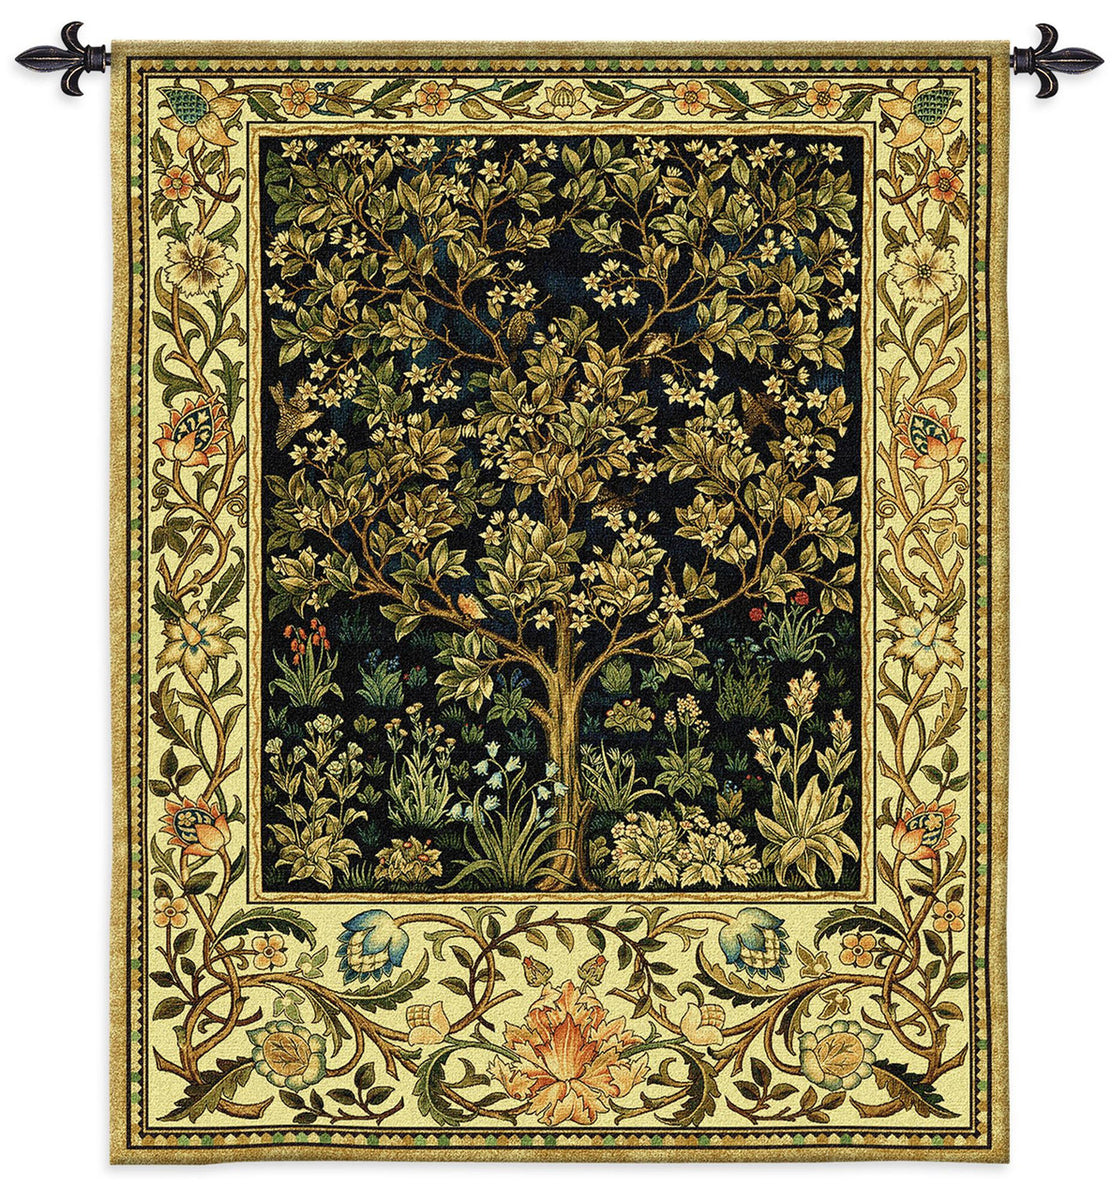 ICONS: William Morris The father of Arts & Crafts